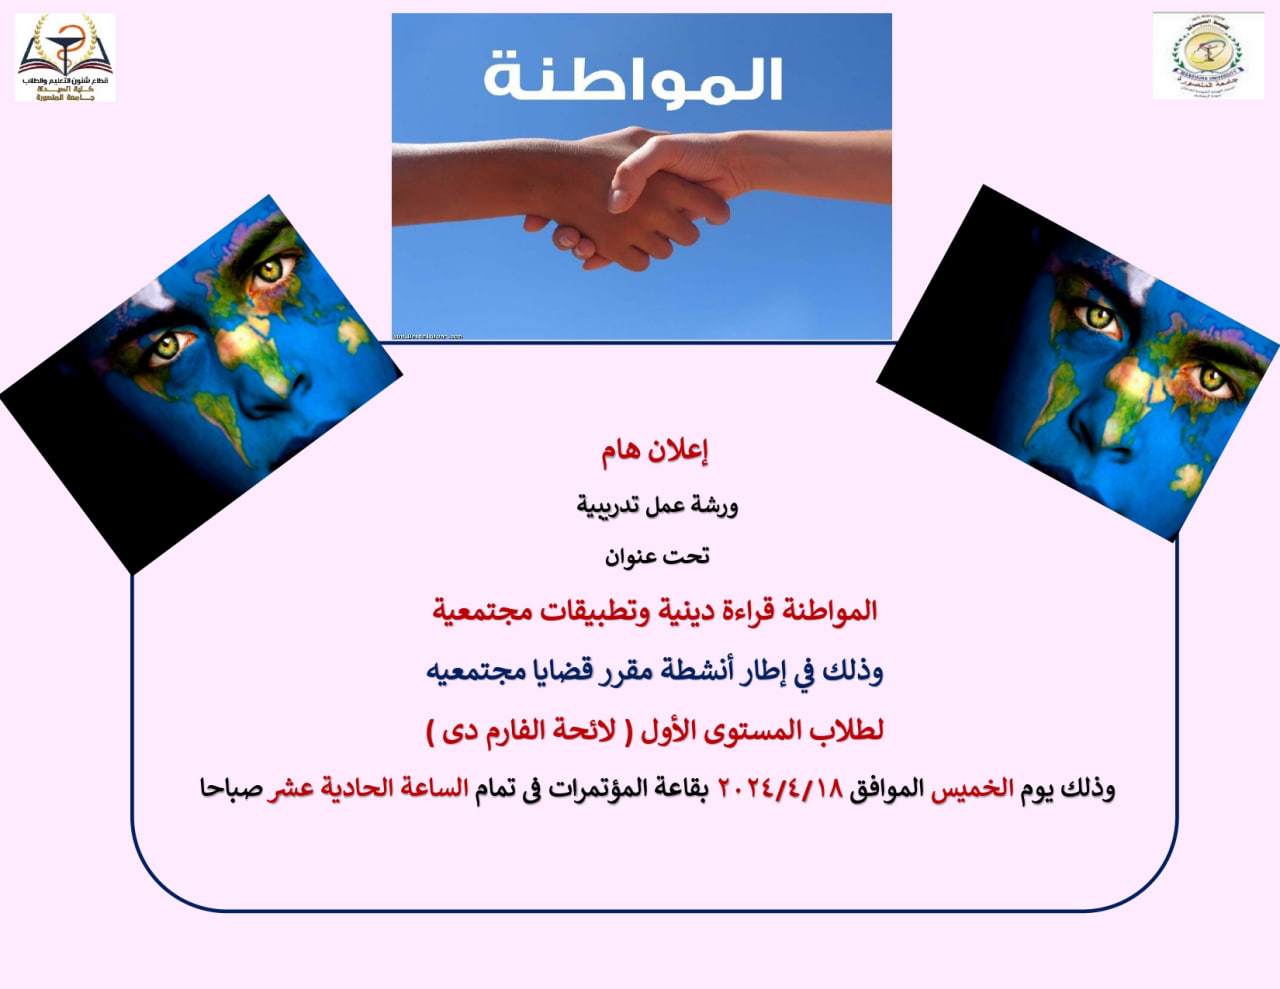 A training workshop entitled Citizenship, Religious Reading and Community Applications